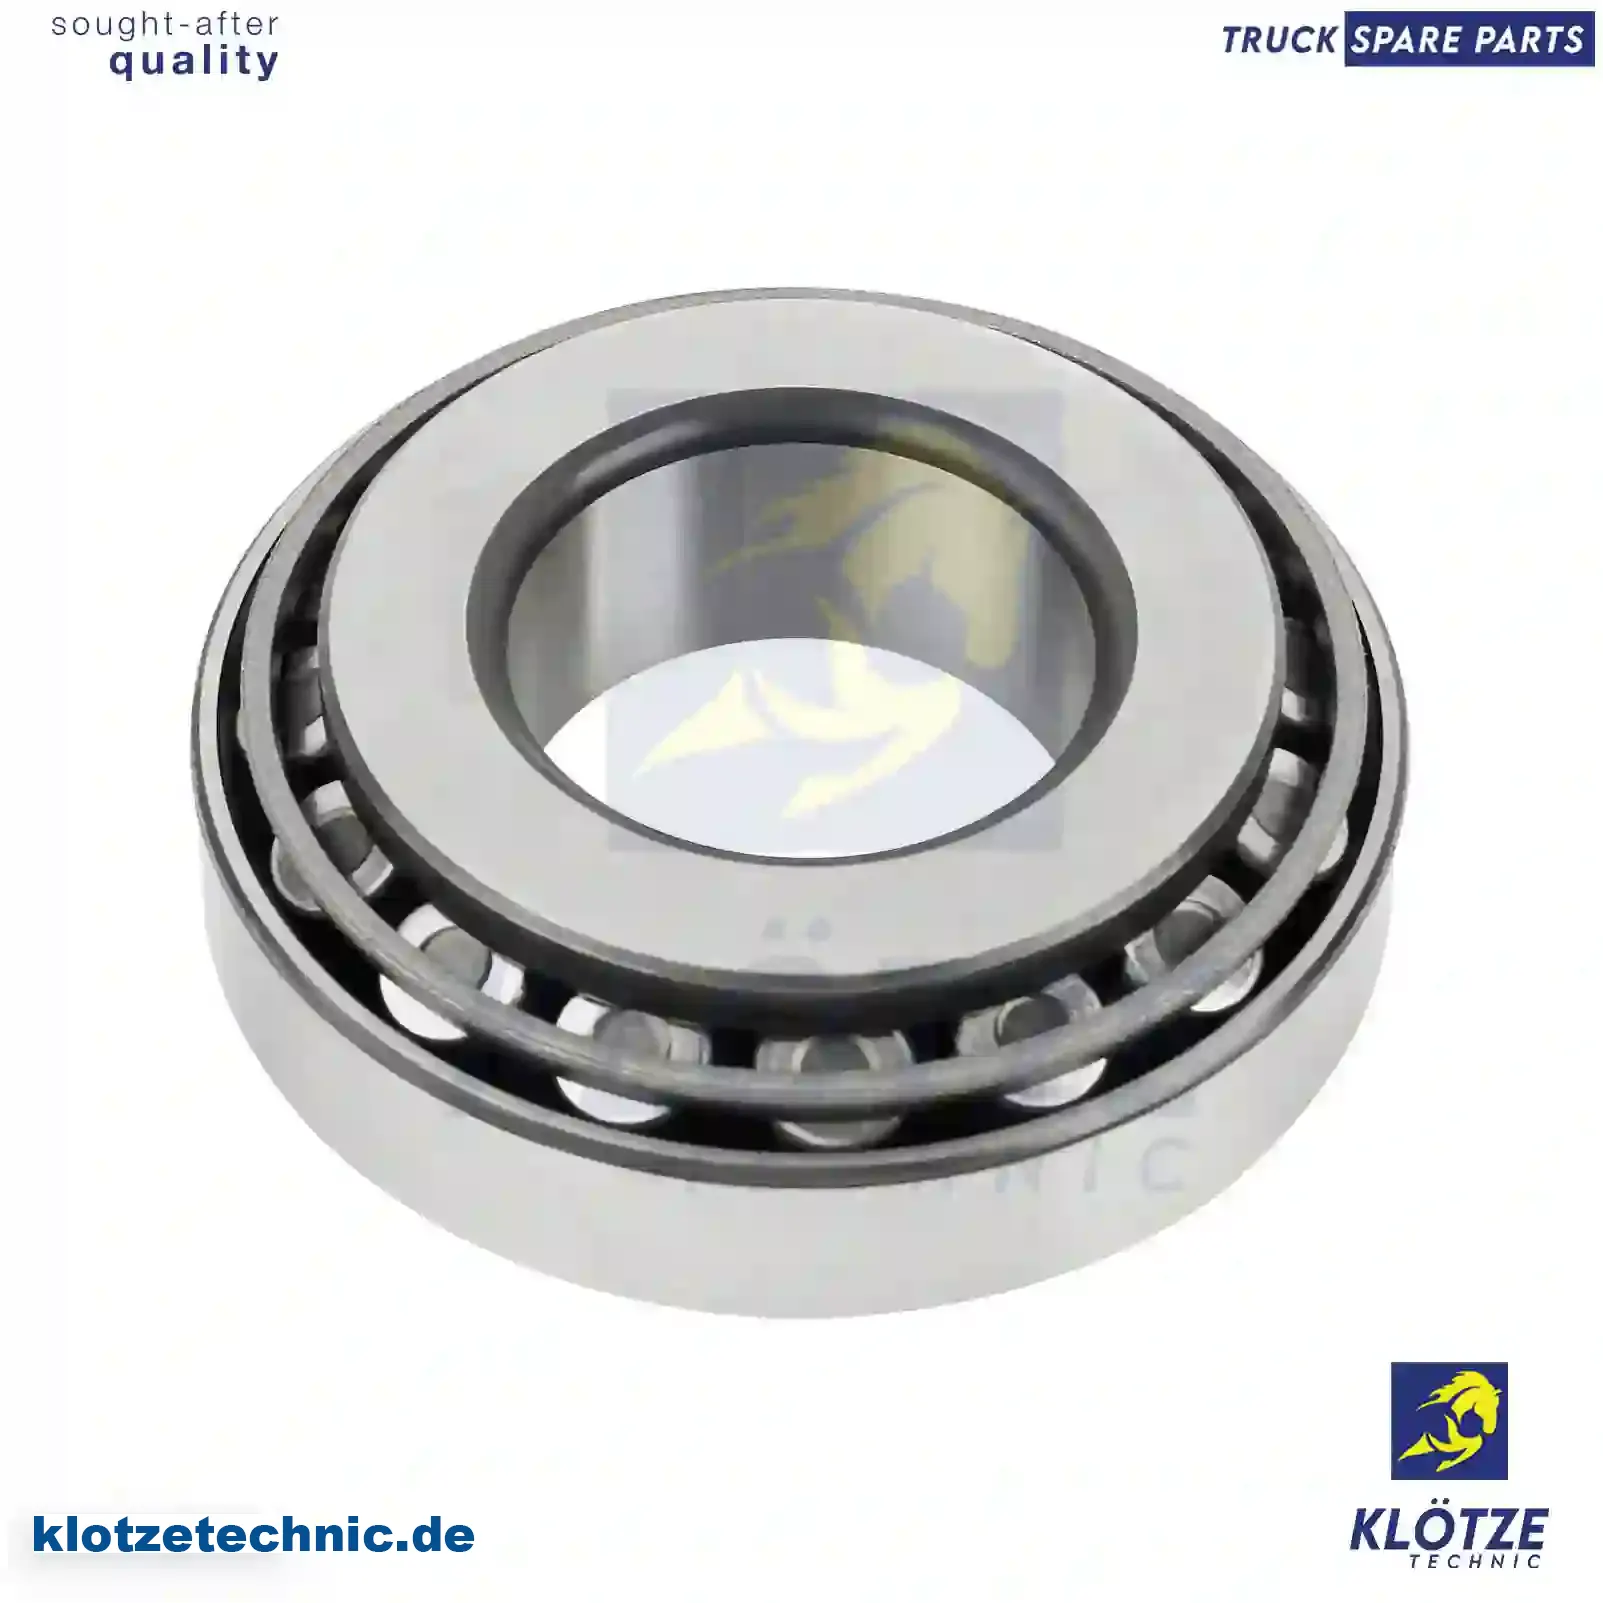 Tapered roller bearing, 005101458, 01905215, 07172776, 1905215, 5003090028